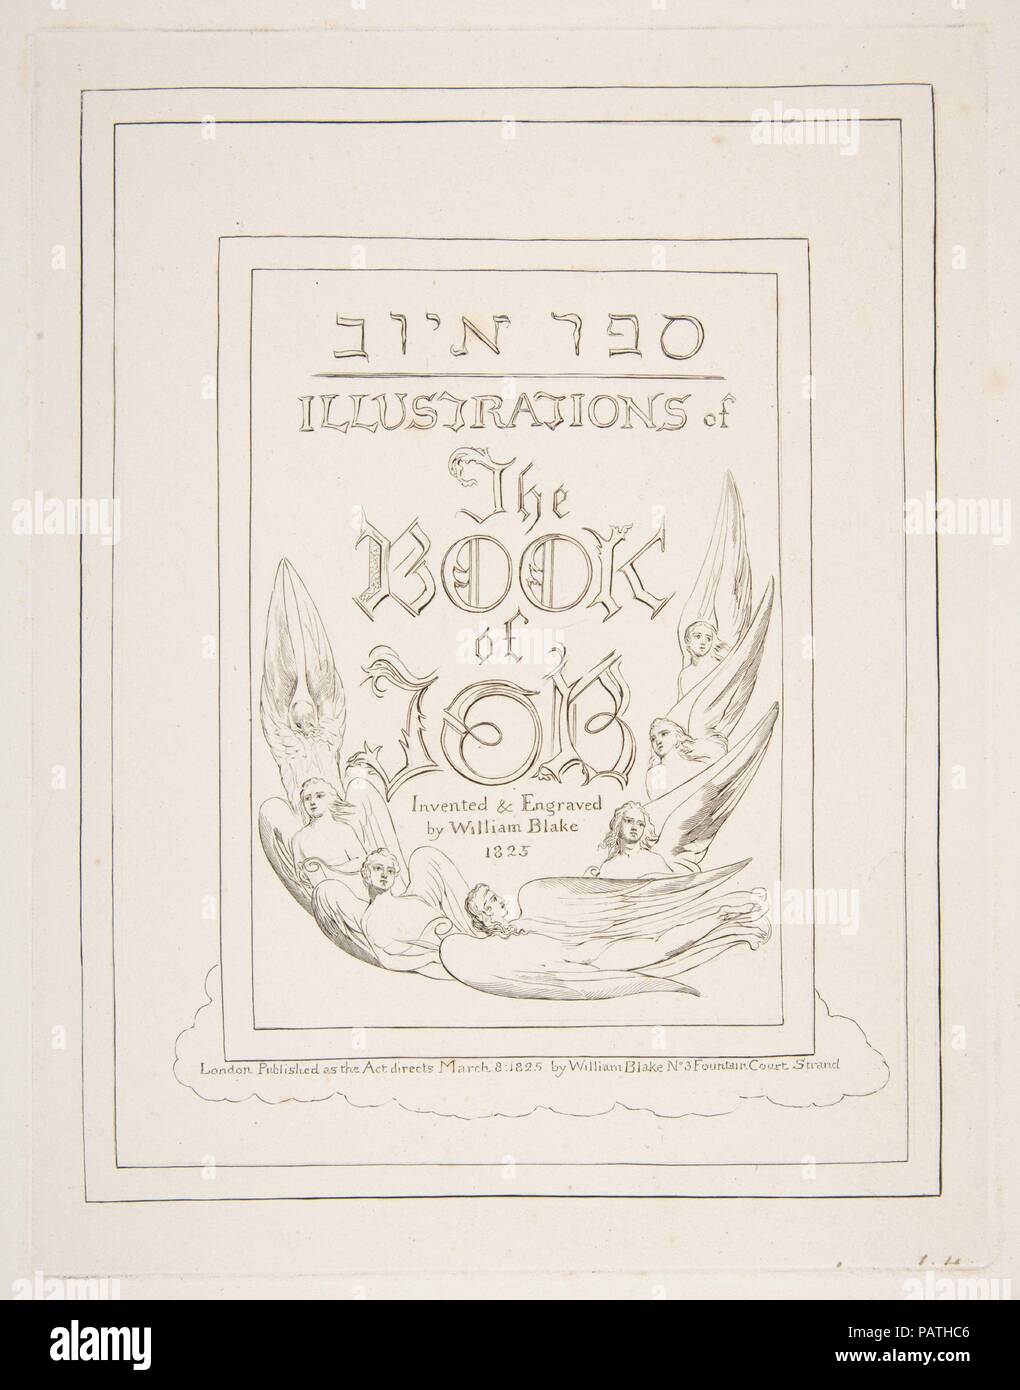 Title Page, from Illustrations of the Book of Job. Artist: William Blake (British, London 1757-1827 London). Dimensions: plate: 8 1/4 x 6 3/8 in. (21 x 16.2 cm)  sheet: 16 1/8 x 10 7/8 in. (41 x 27.6 cm). Publisher: Published by William Blake (British, London 1757-1827 London) No. 3 Fountain Court, Strand. Date: 1825-26. Museum: Metropolitan Museum of Art, New York, USA. Stock Photo